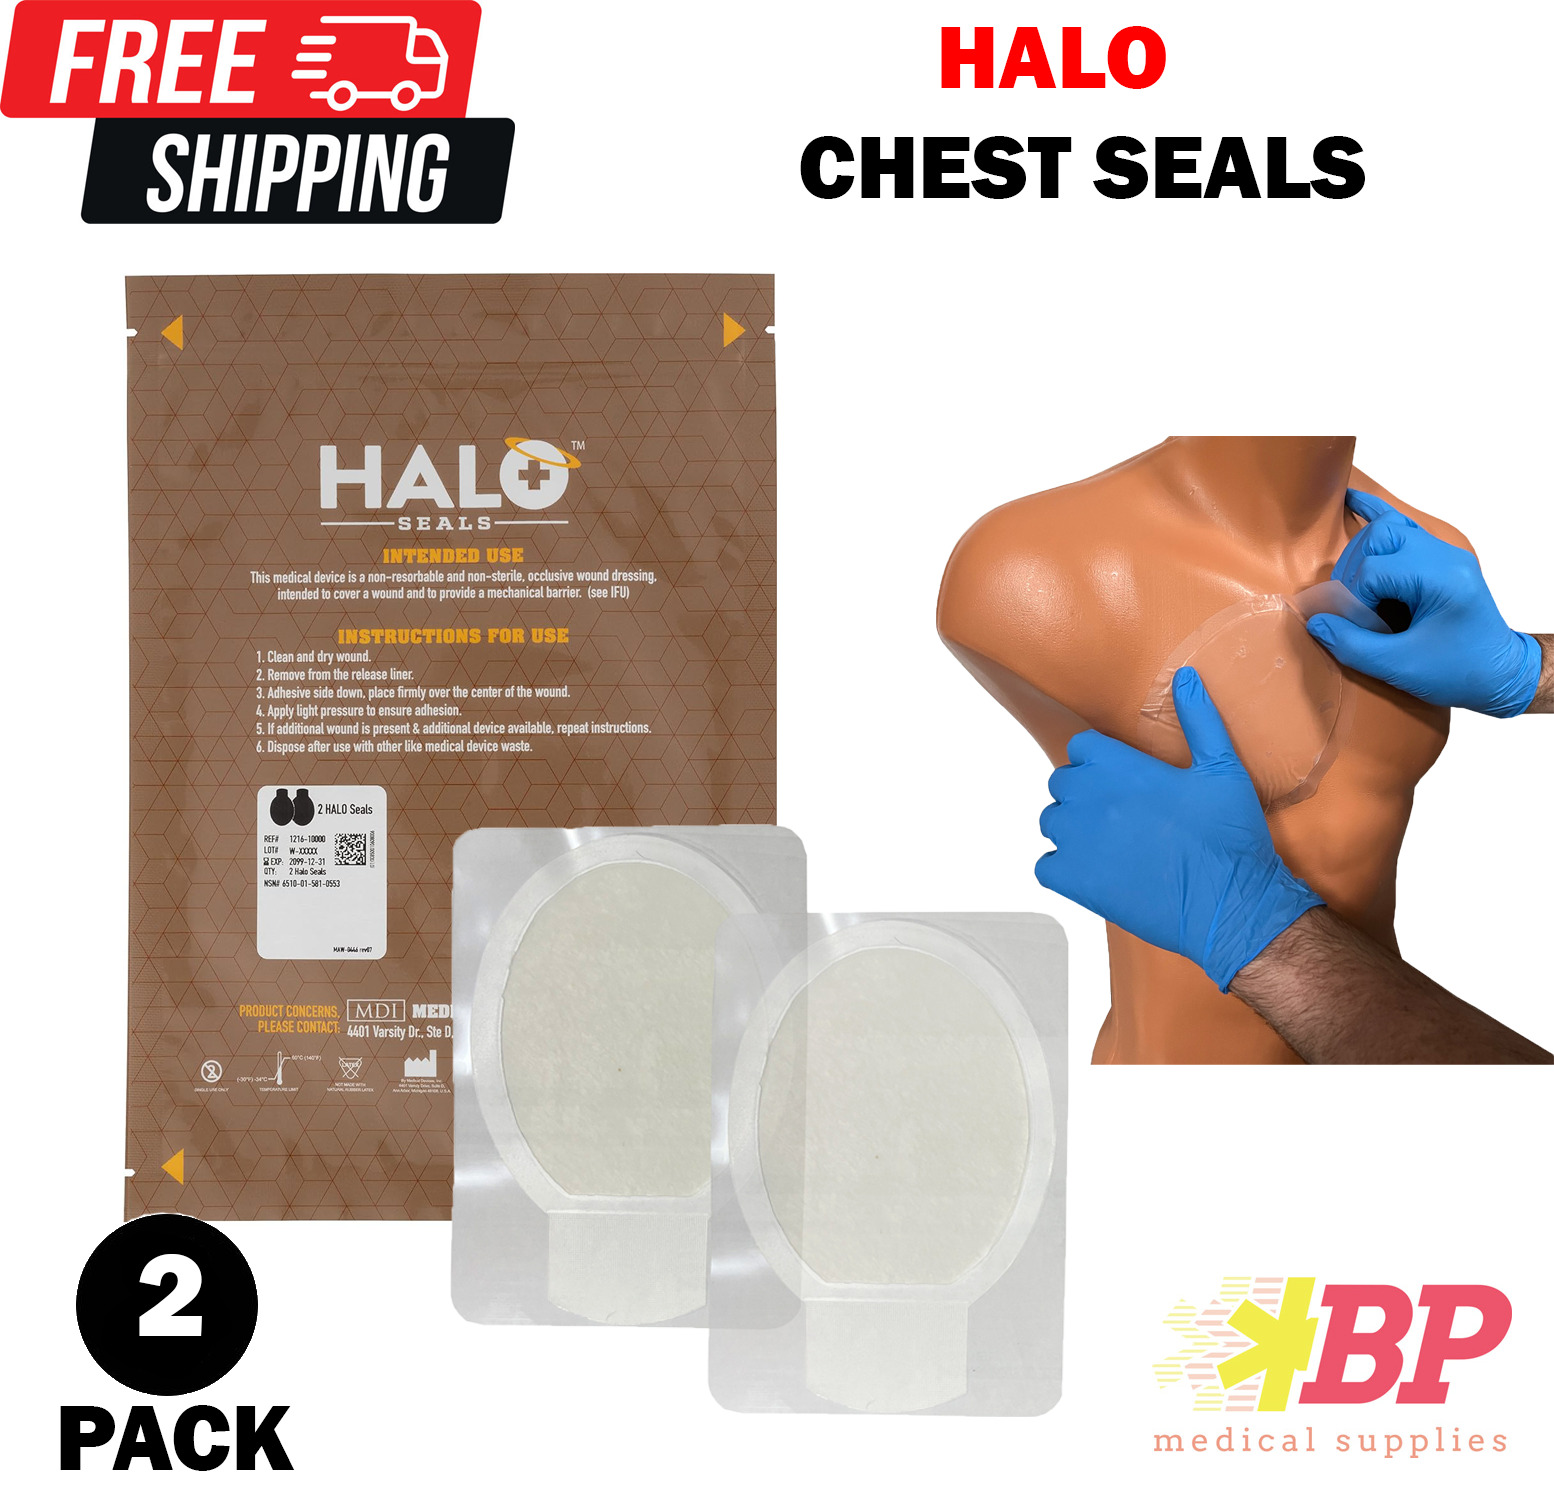 Halo Chest Seals First Aid EMT EMS Emergency Dressing for Trauma Wounds - 2 Pack